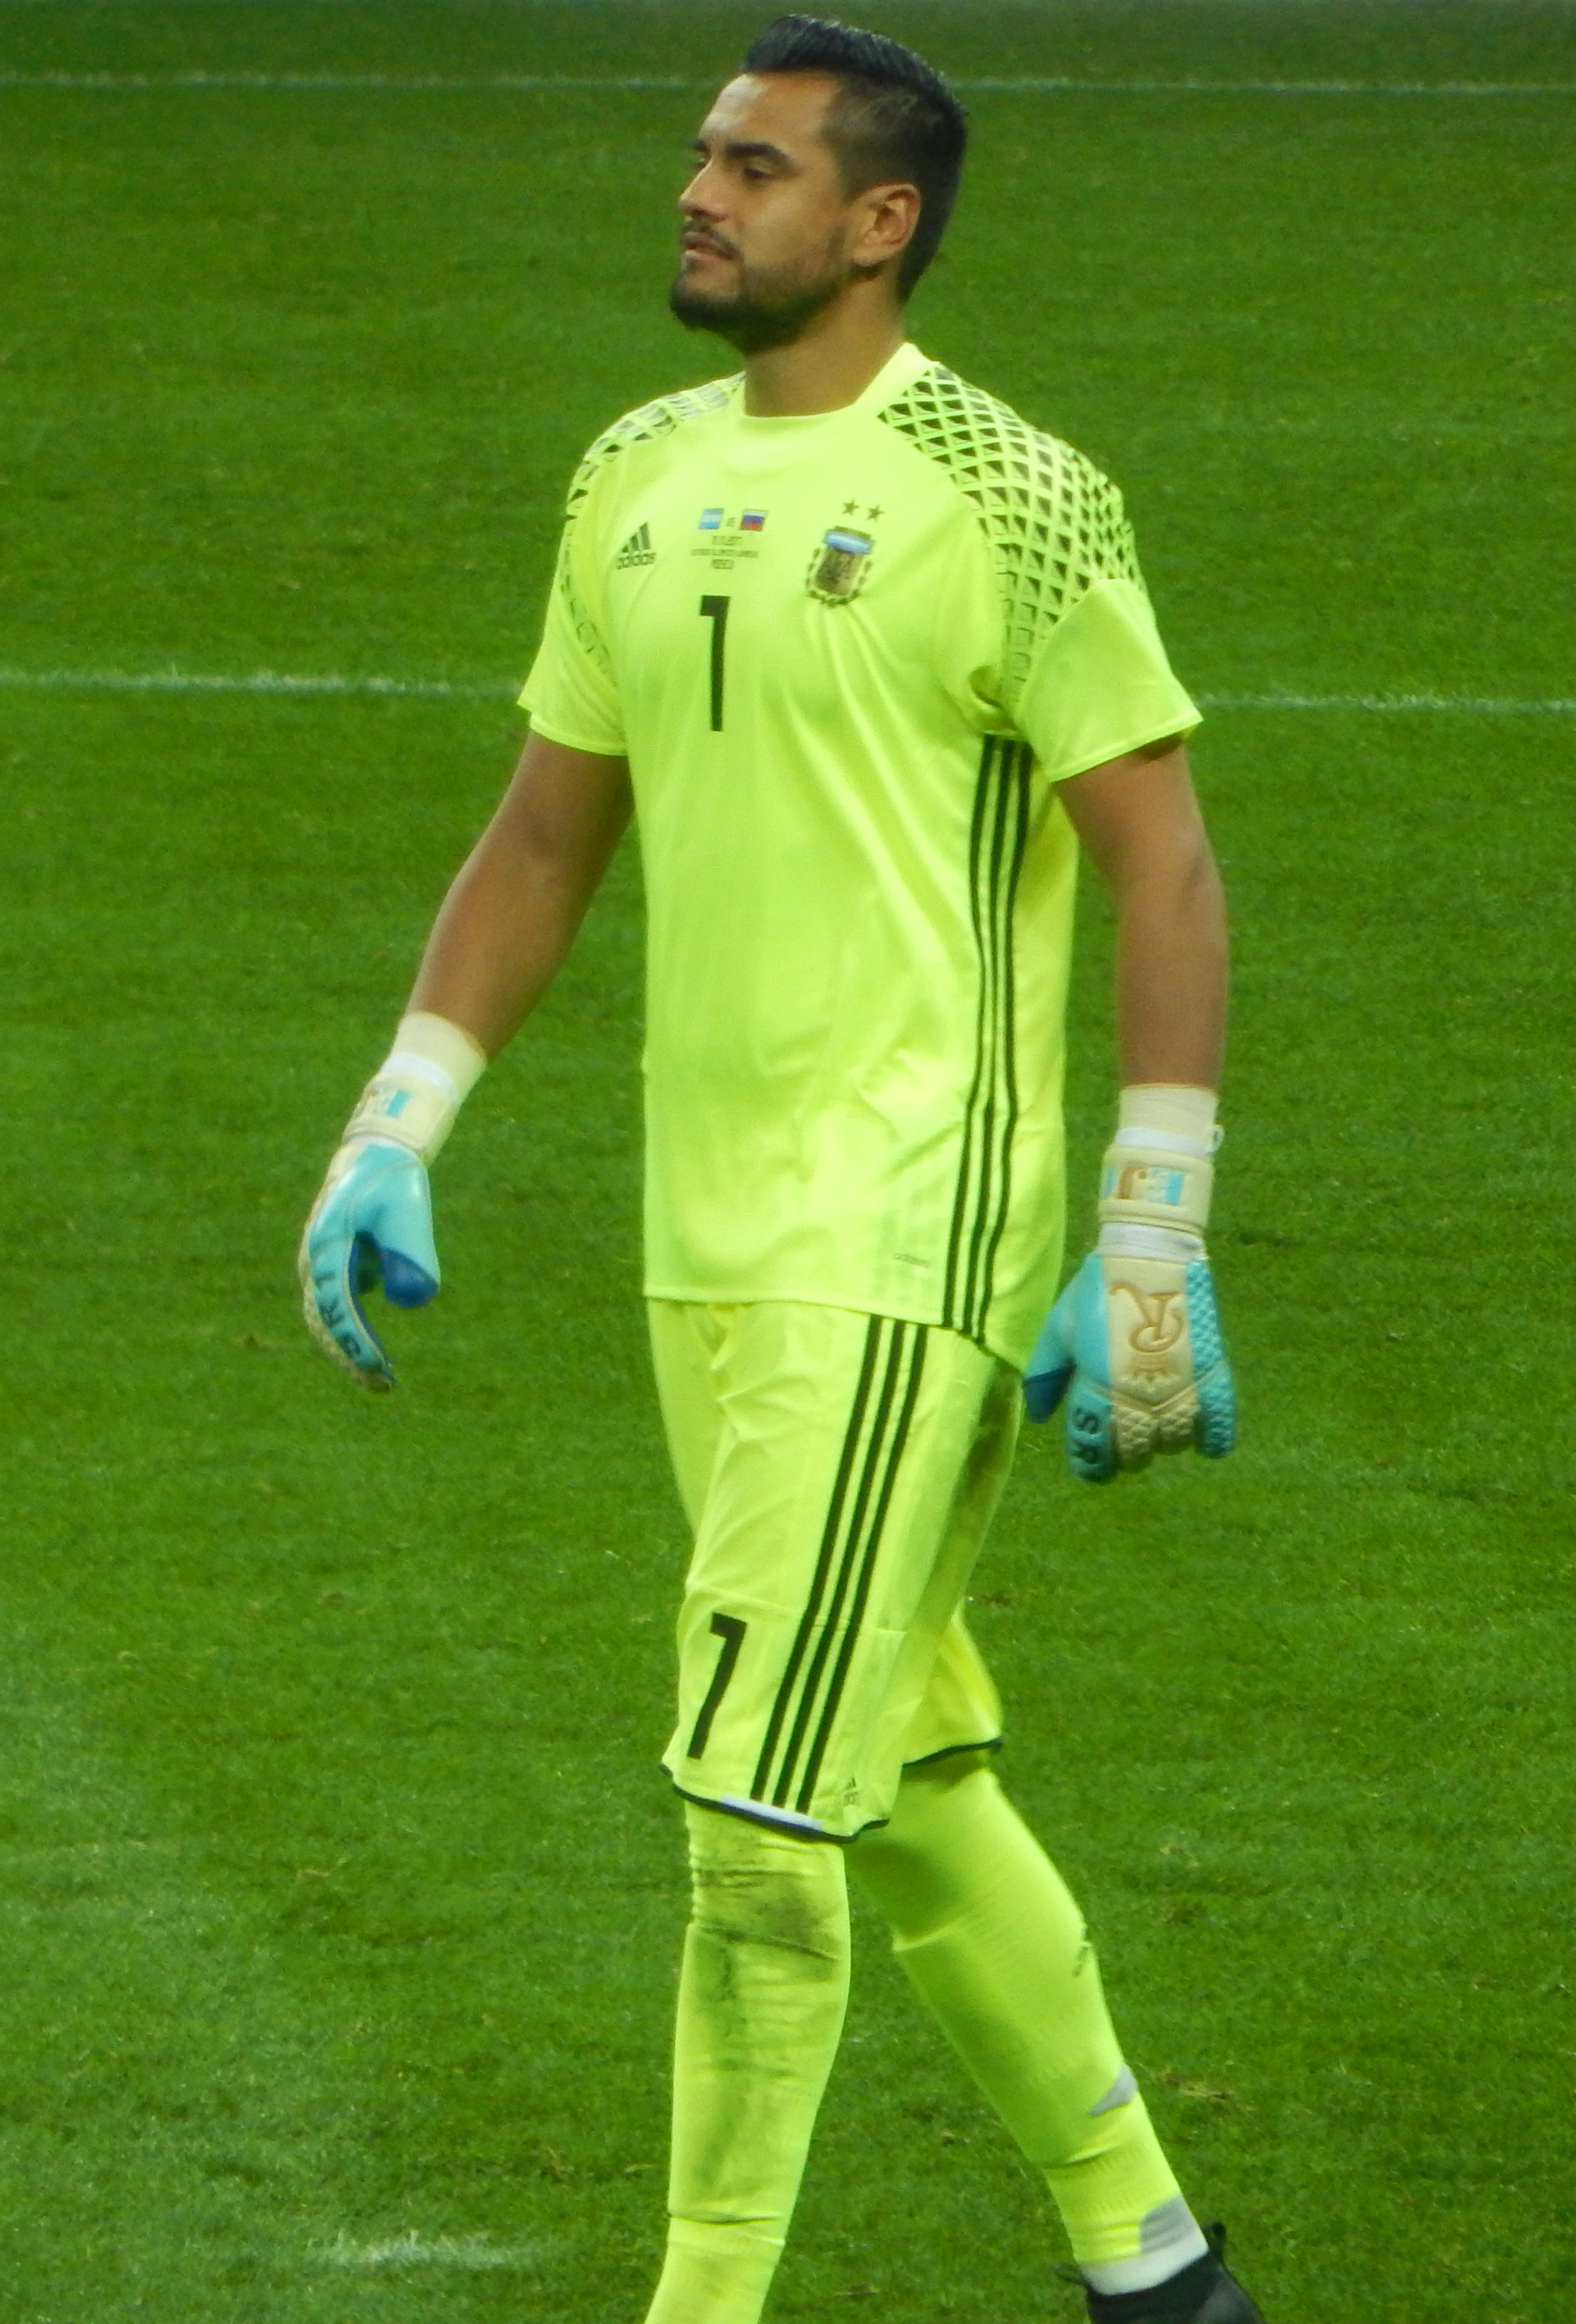 Romero playing for [[Argentina national football team|Argentina]] in 2017